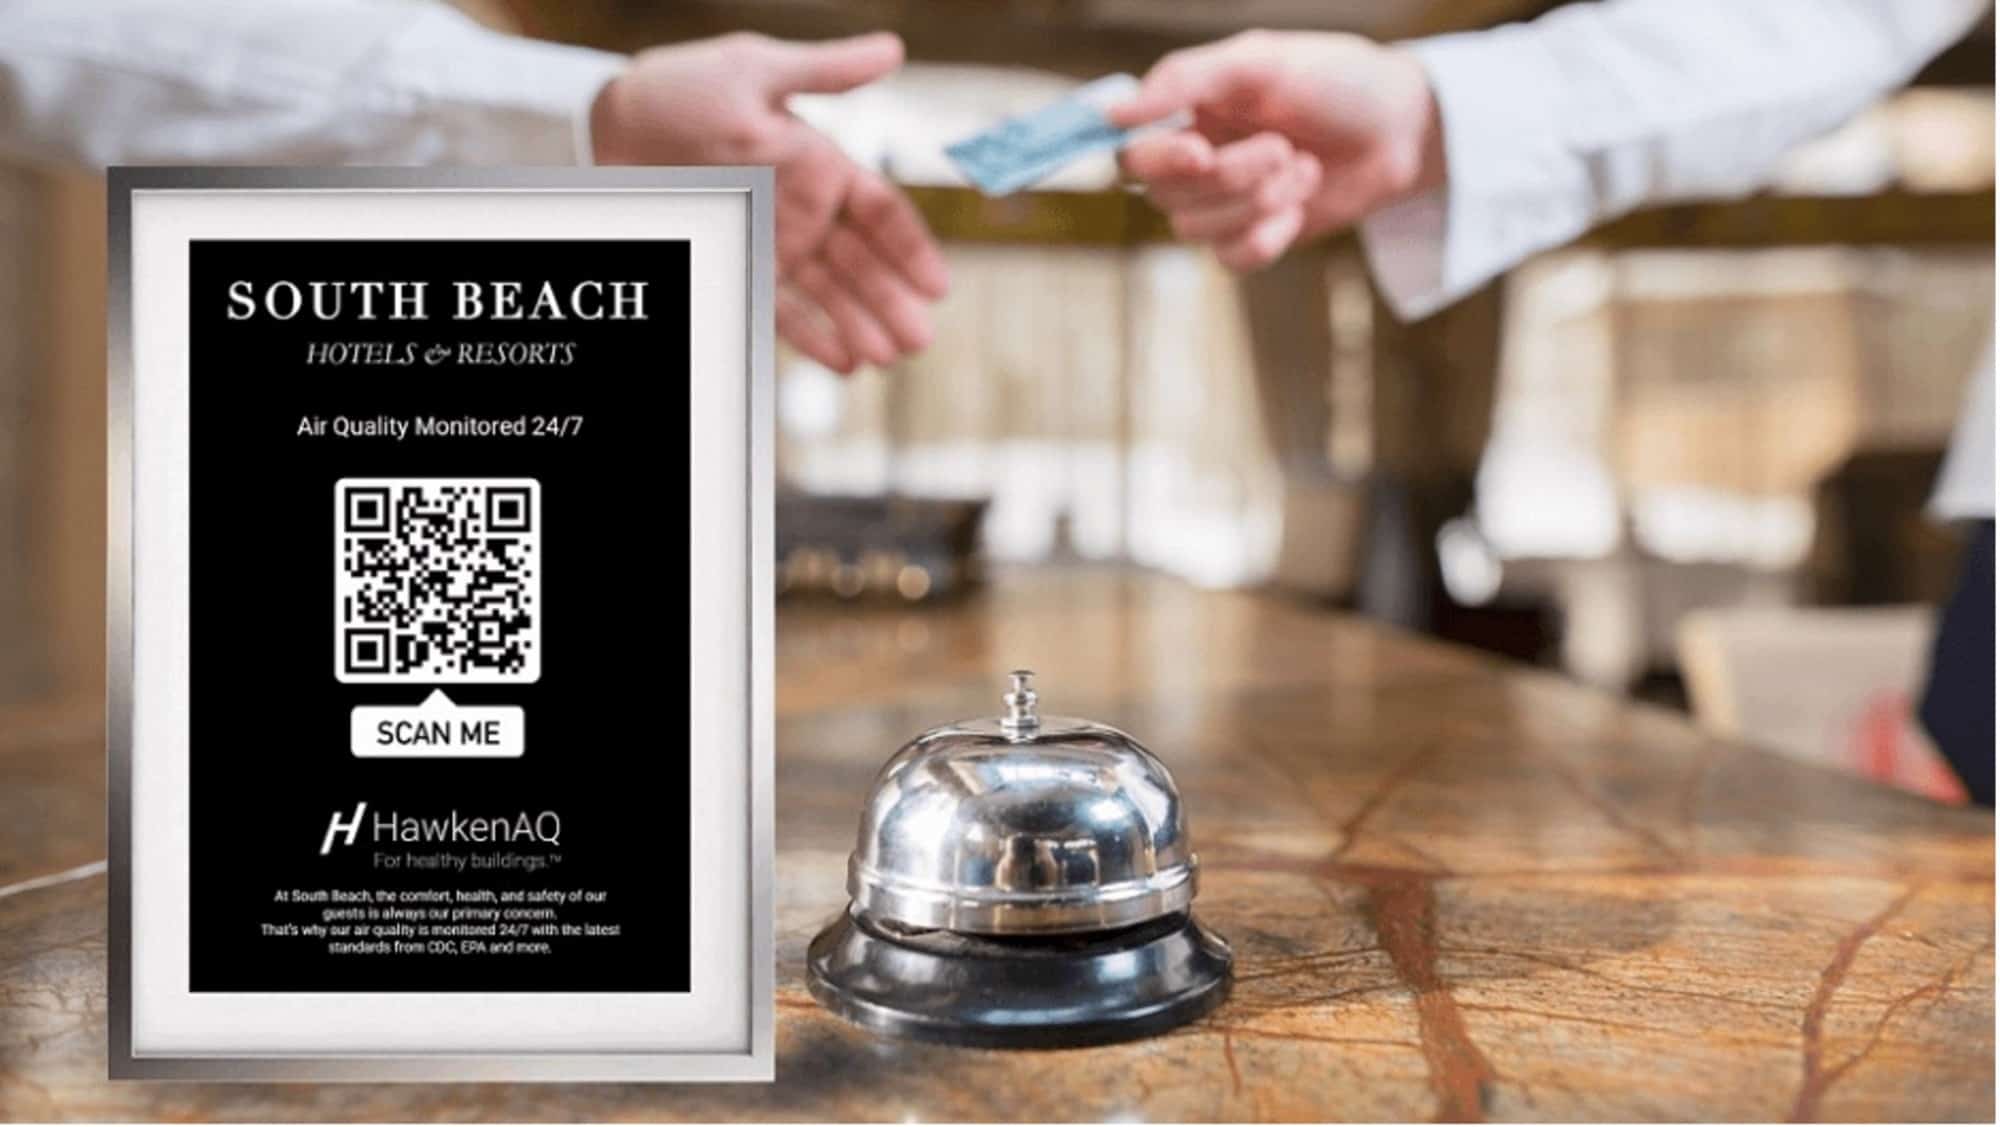 A sign displayed at a hotel check in desk featuring a QR code. A bell sits beside the sign while one person hands a credit card to another in the background.